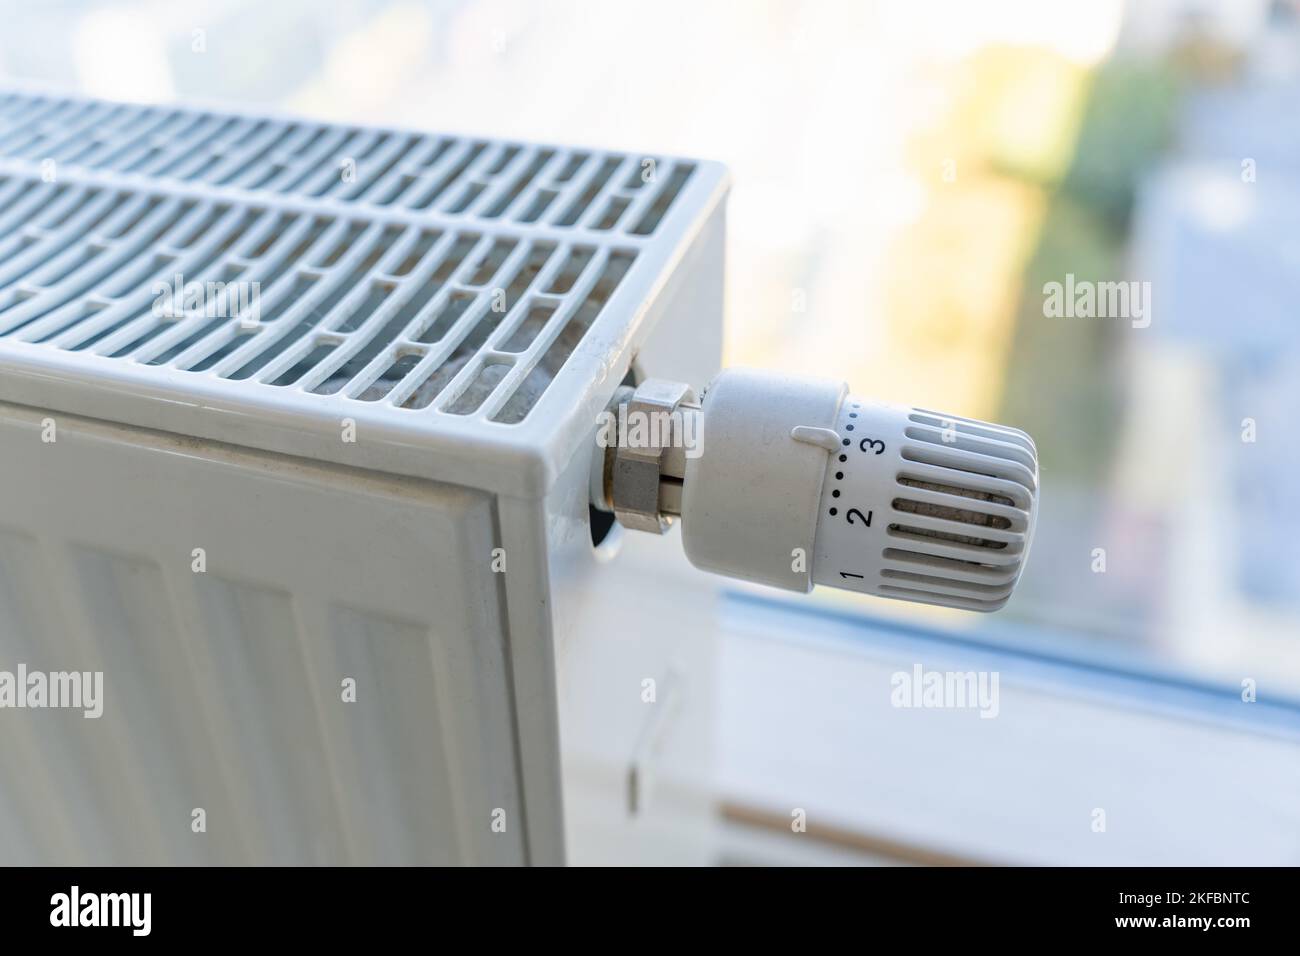 Heating radiator with adjustment knob installed on the middle position in a residential apartment Stock Photo